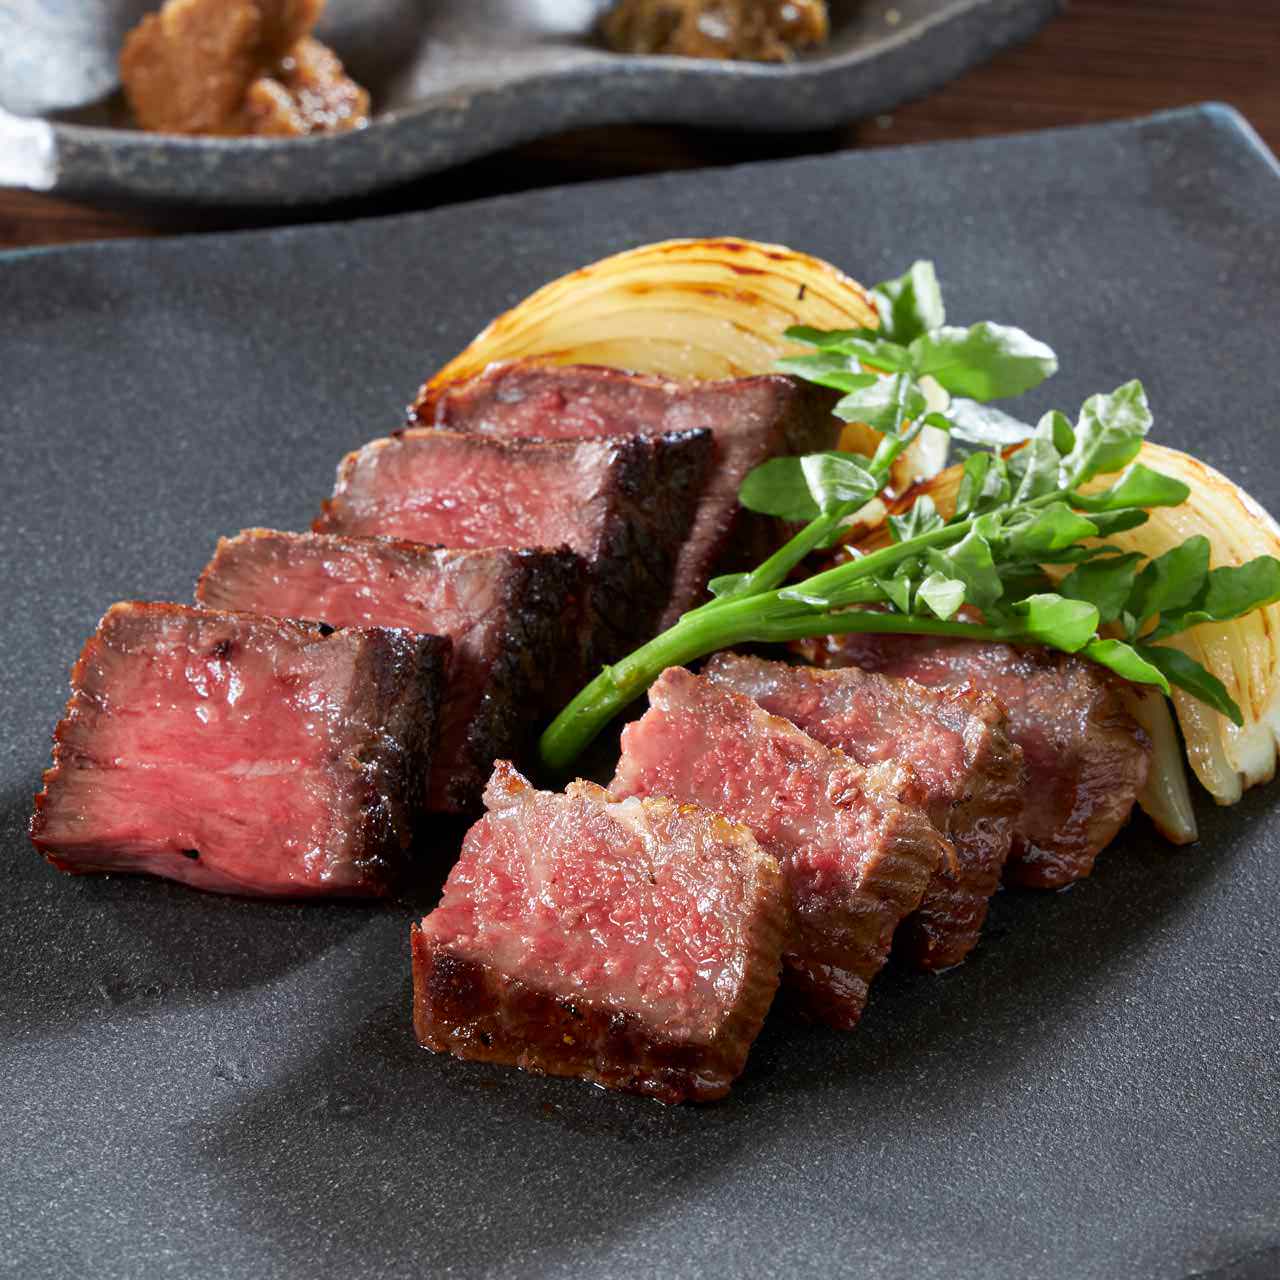 Comparison of two types of steaks: Japanese Black Beef Sirloin and Lean Meat (50g each) 100g